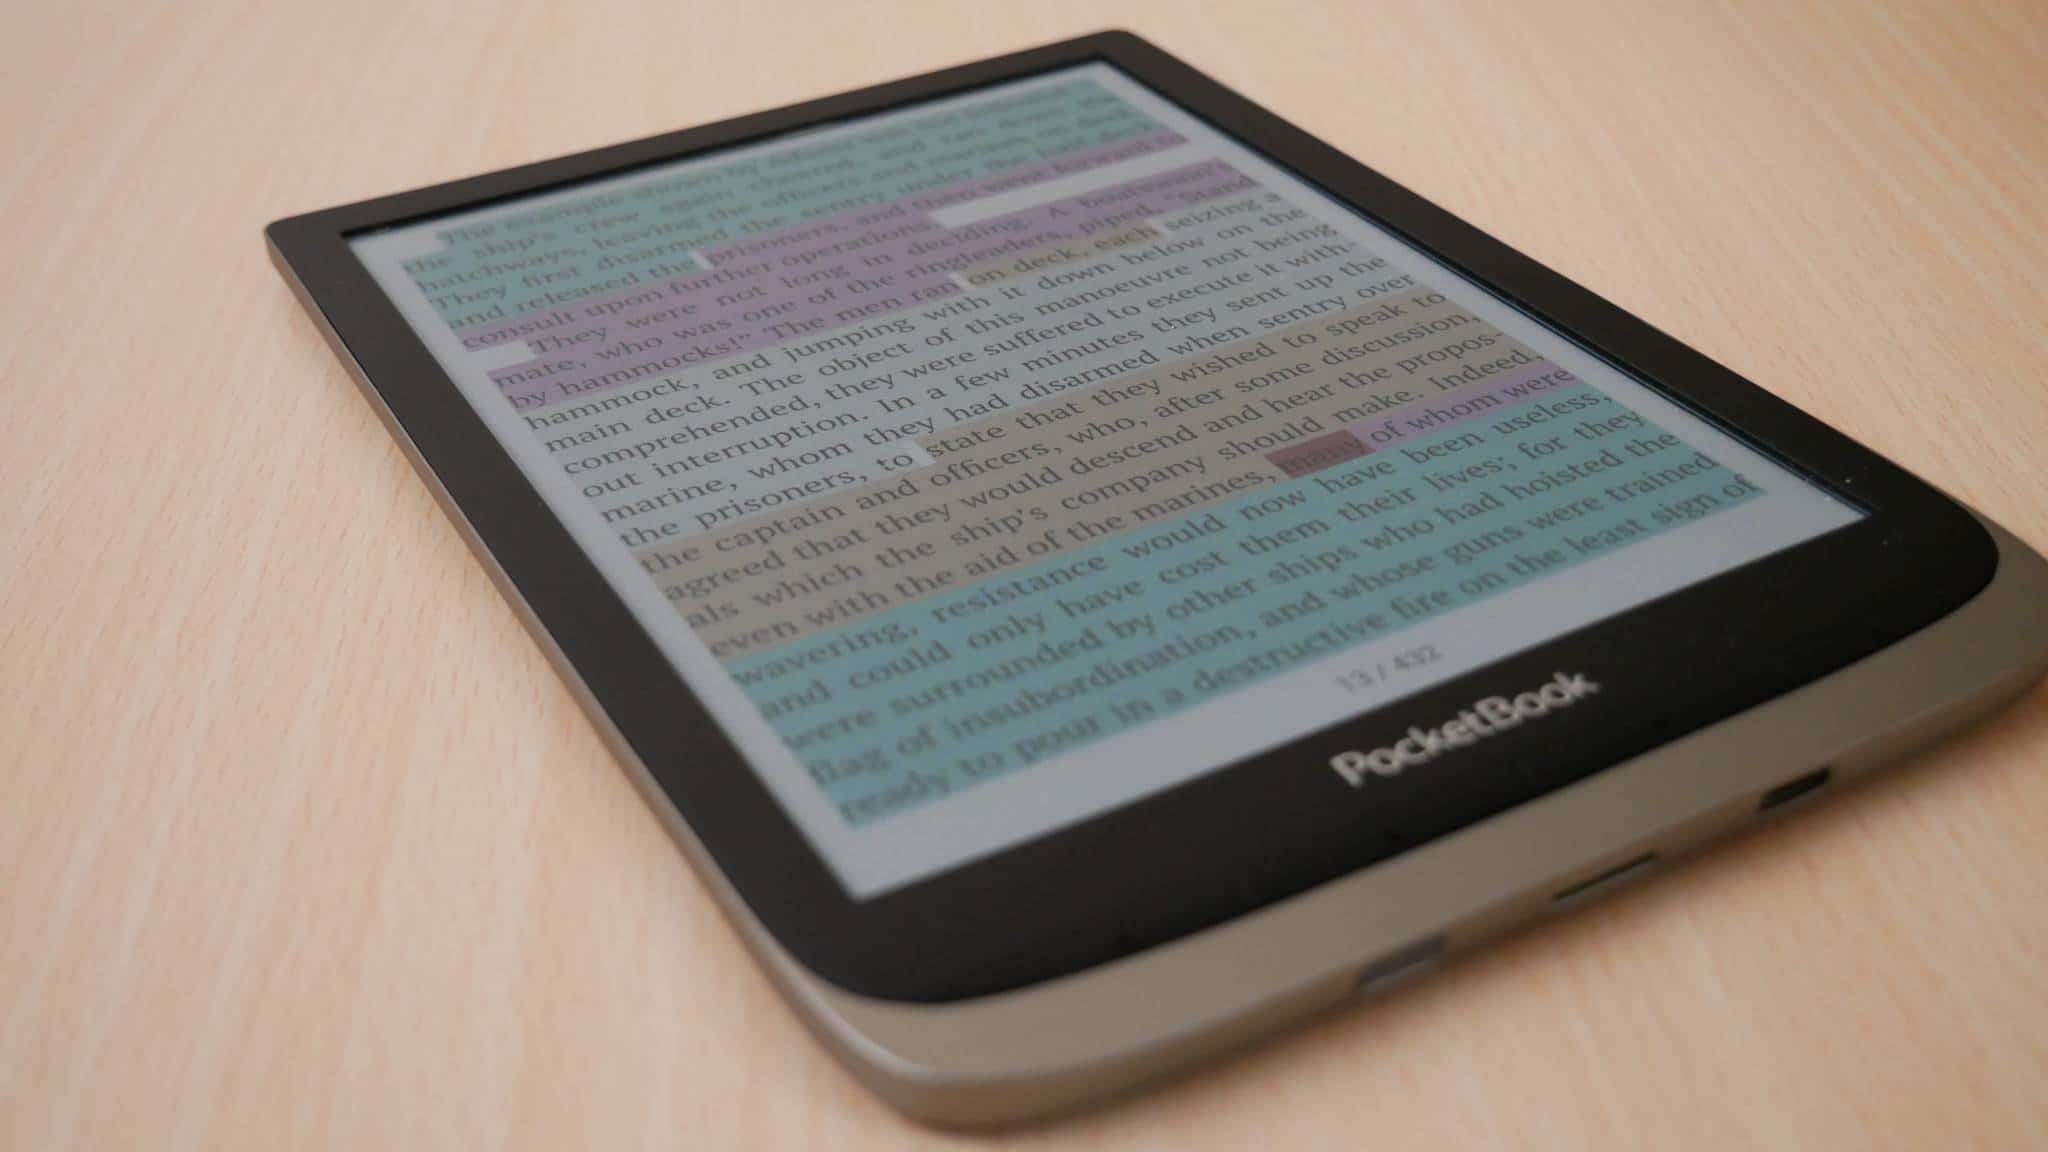 Hands on Review of the Pocketbook InkPad Color e-Reader - Good e